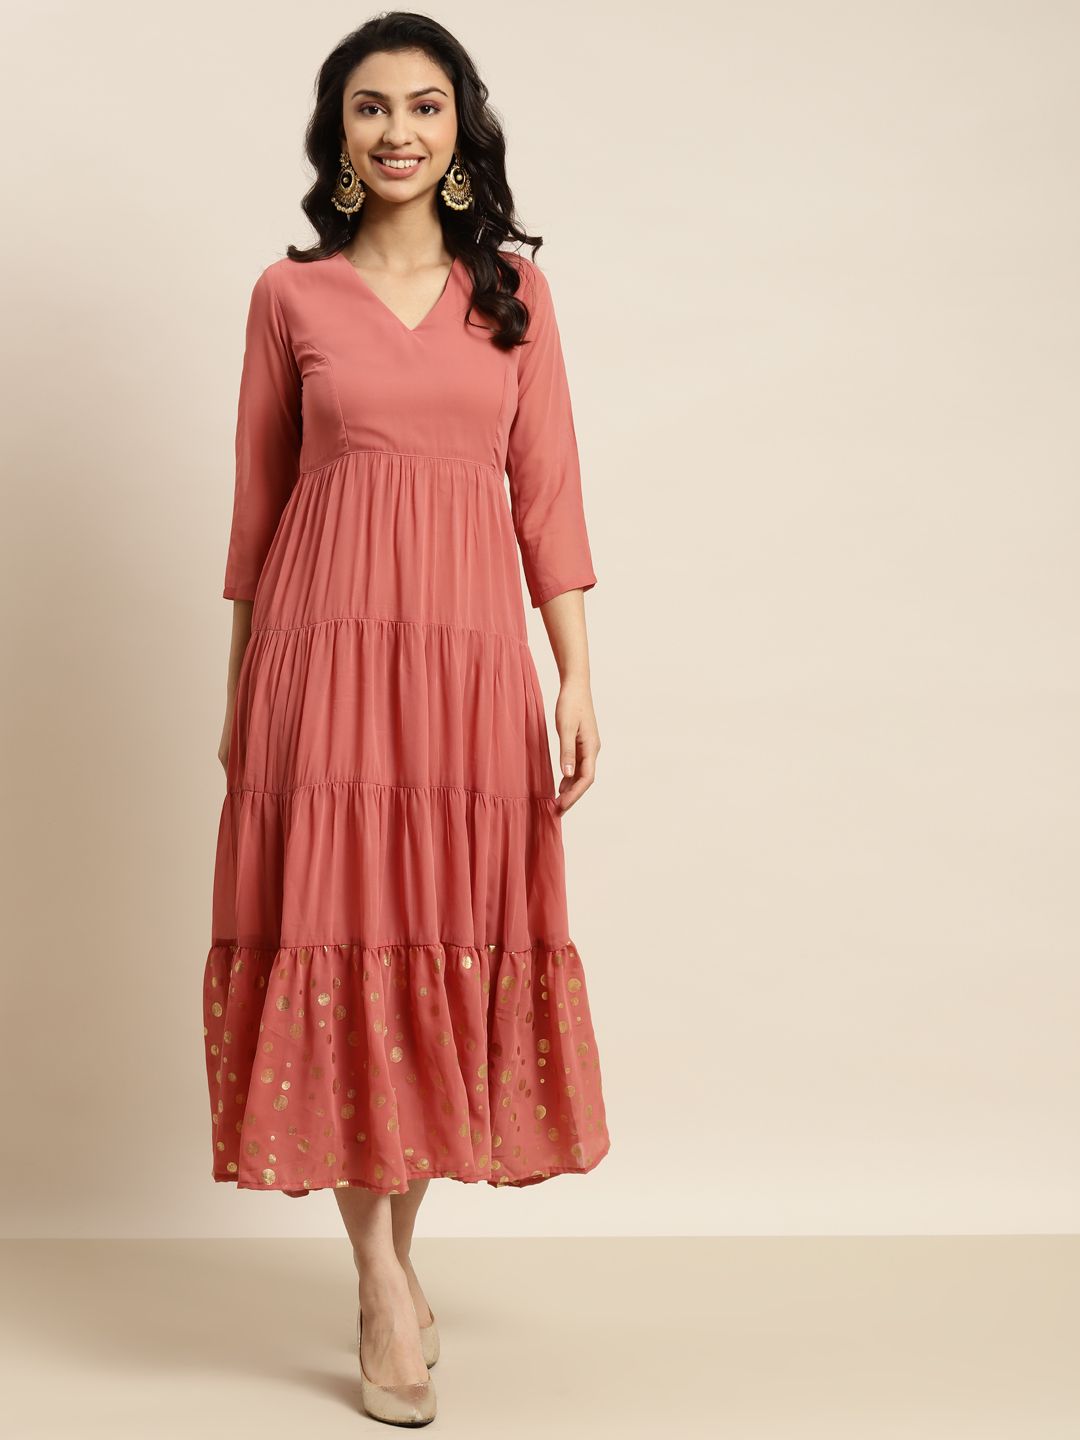 Shae by SASSAFRAS Rust Pink & Golden Foil Print Georgette Ethnic Tiered Maxi Dress Price in India